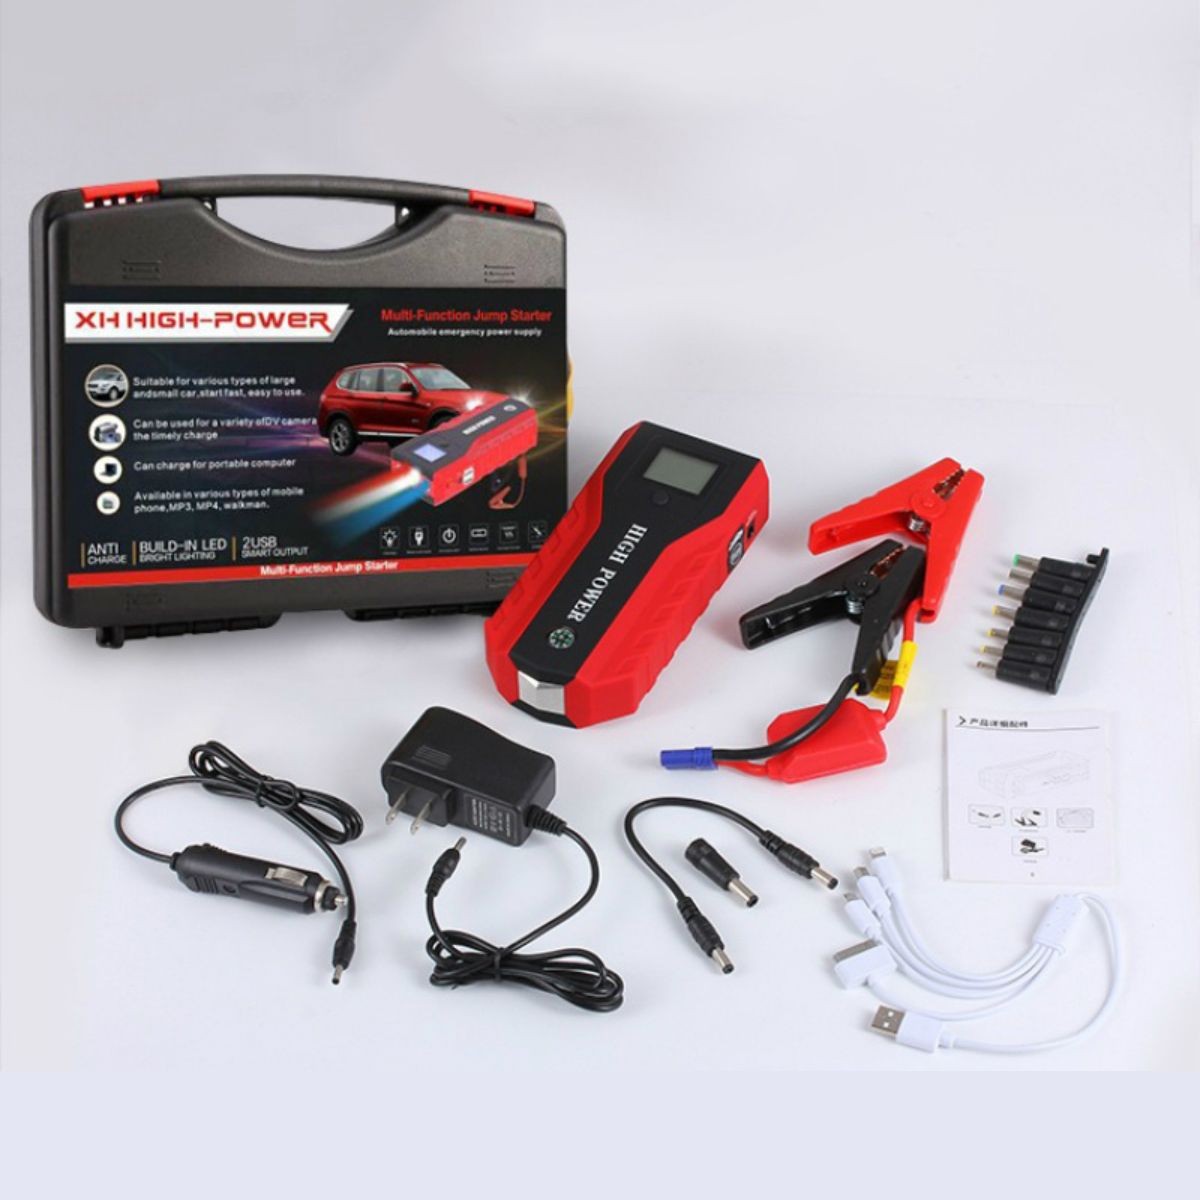 16800mAh-Car-Jump-Starter-Power-Bank-600A-12V-Starting-Device-Booster-Multi-function-for-Battery-Cha-1373561